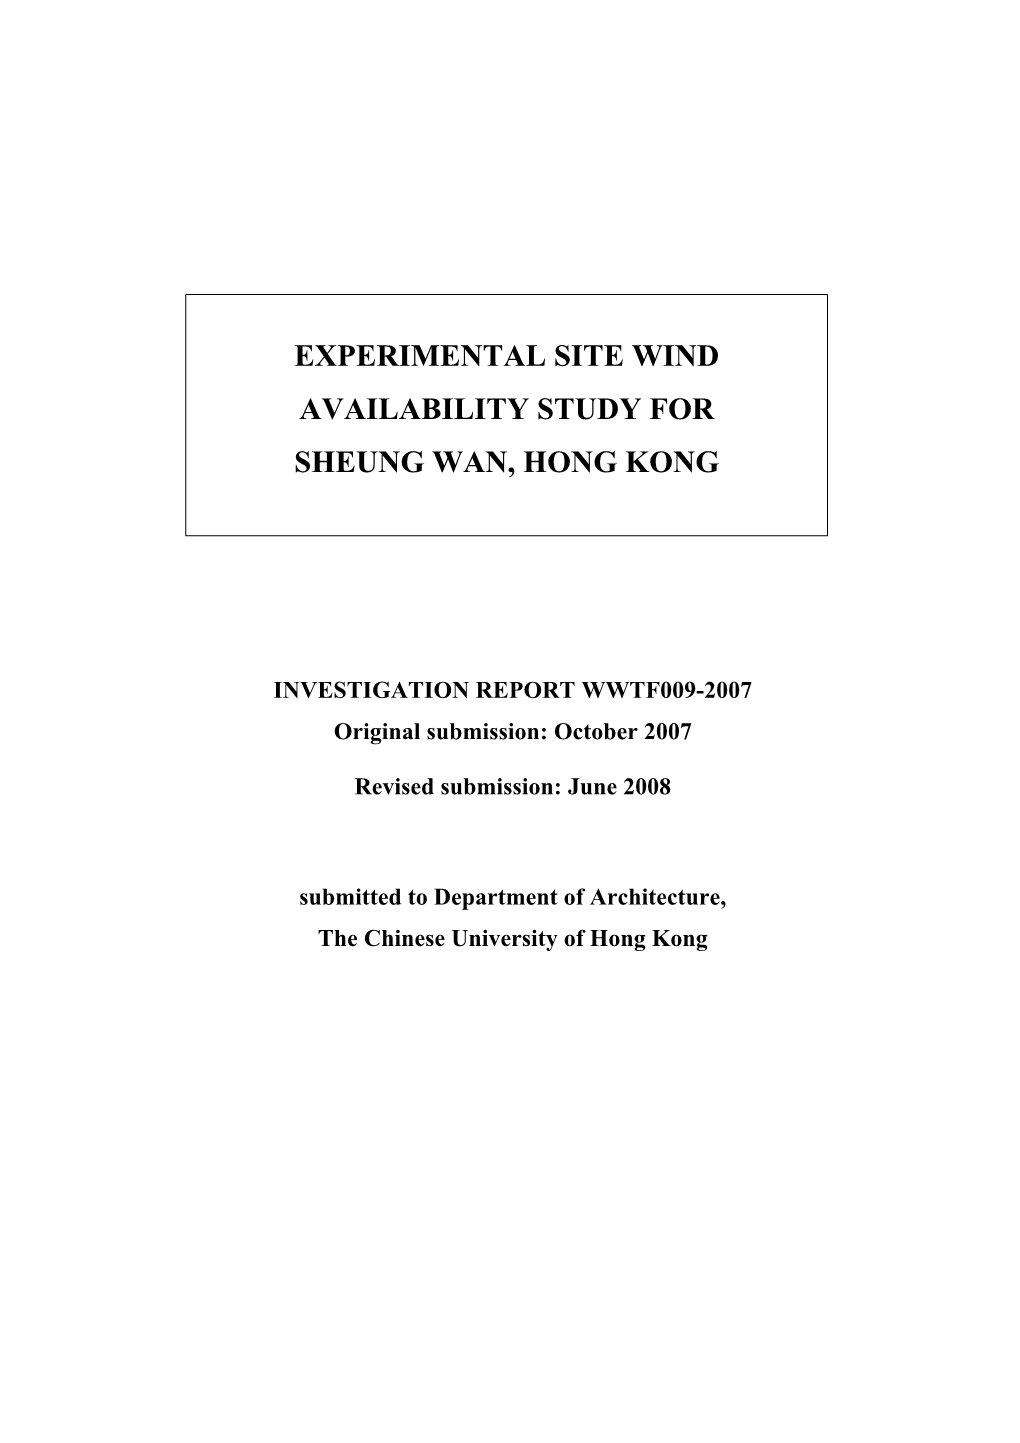 Experimental Site Wind Availability Data for Sheung